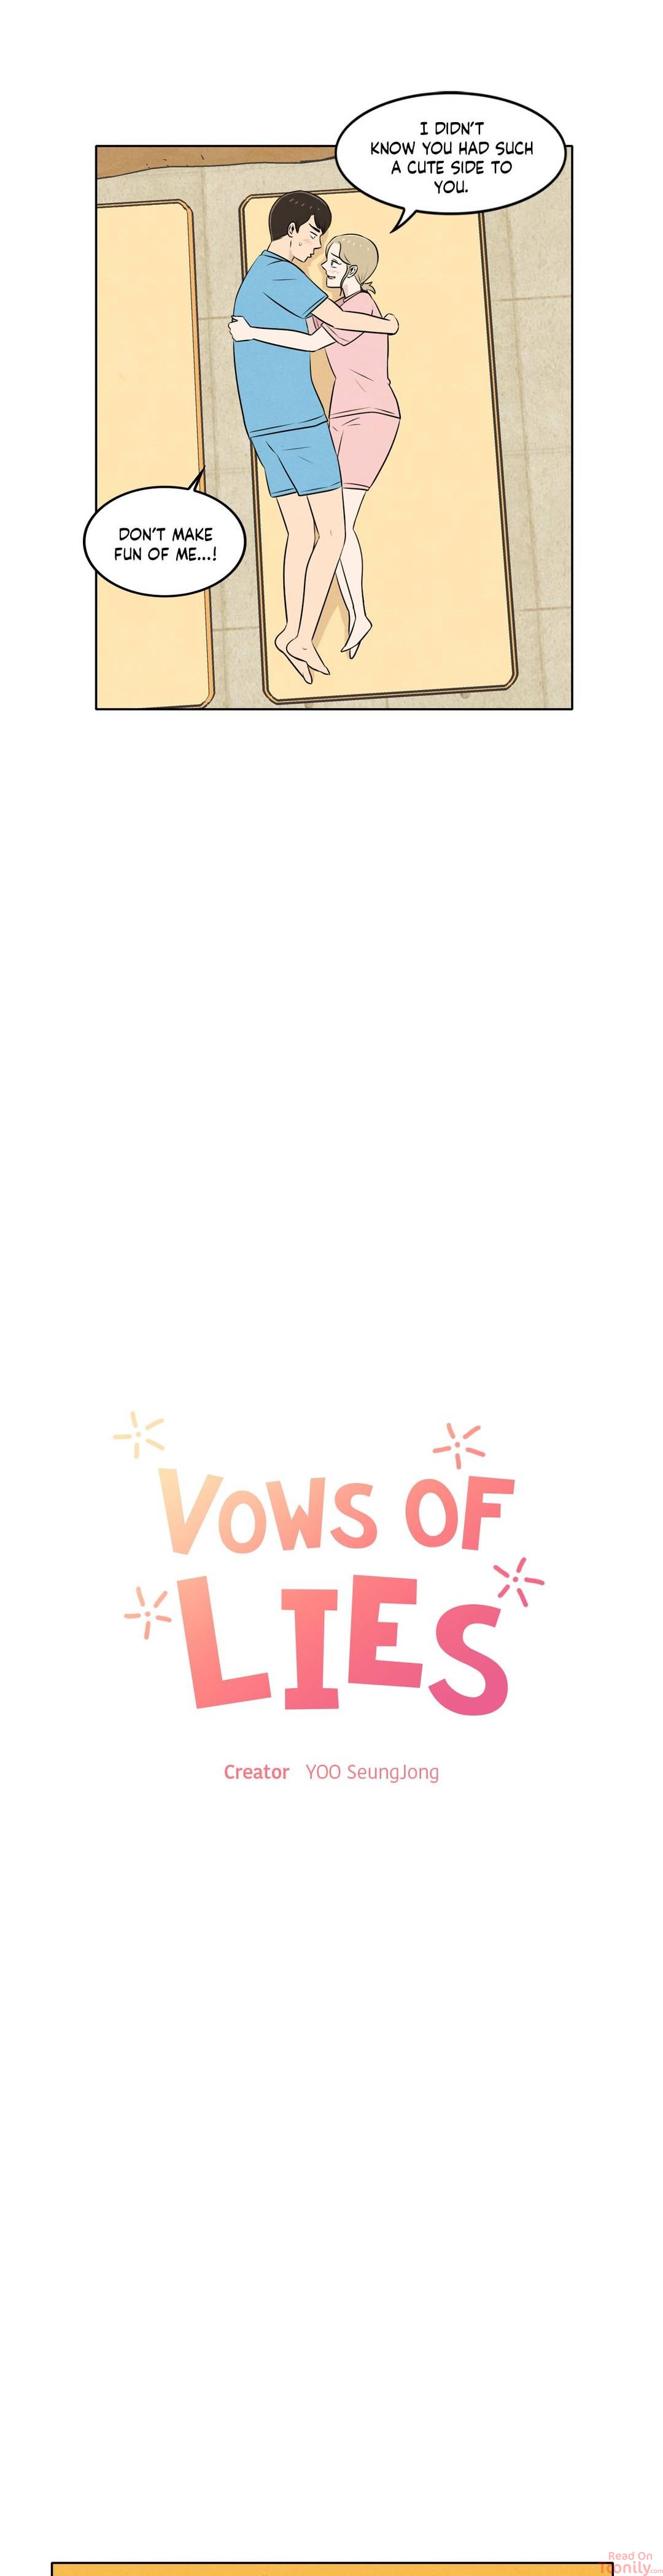 Vows of Lies image